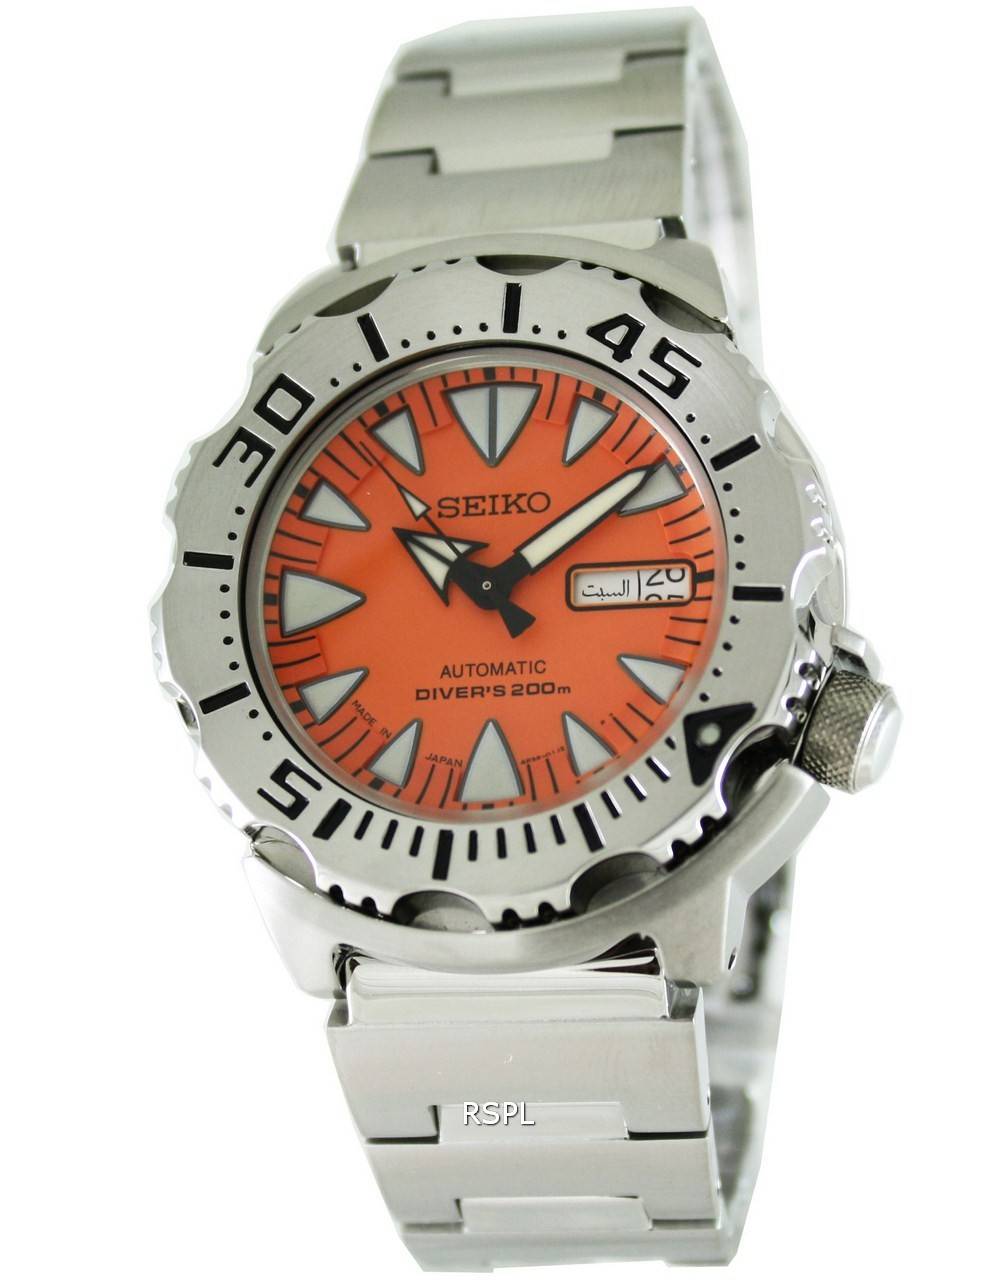 Seiko Japan Made Automatic 200M Divers Orange Monster SRP309J SRP309 Mens  Watch 